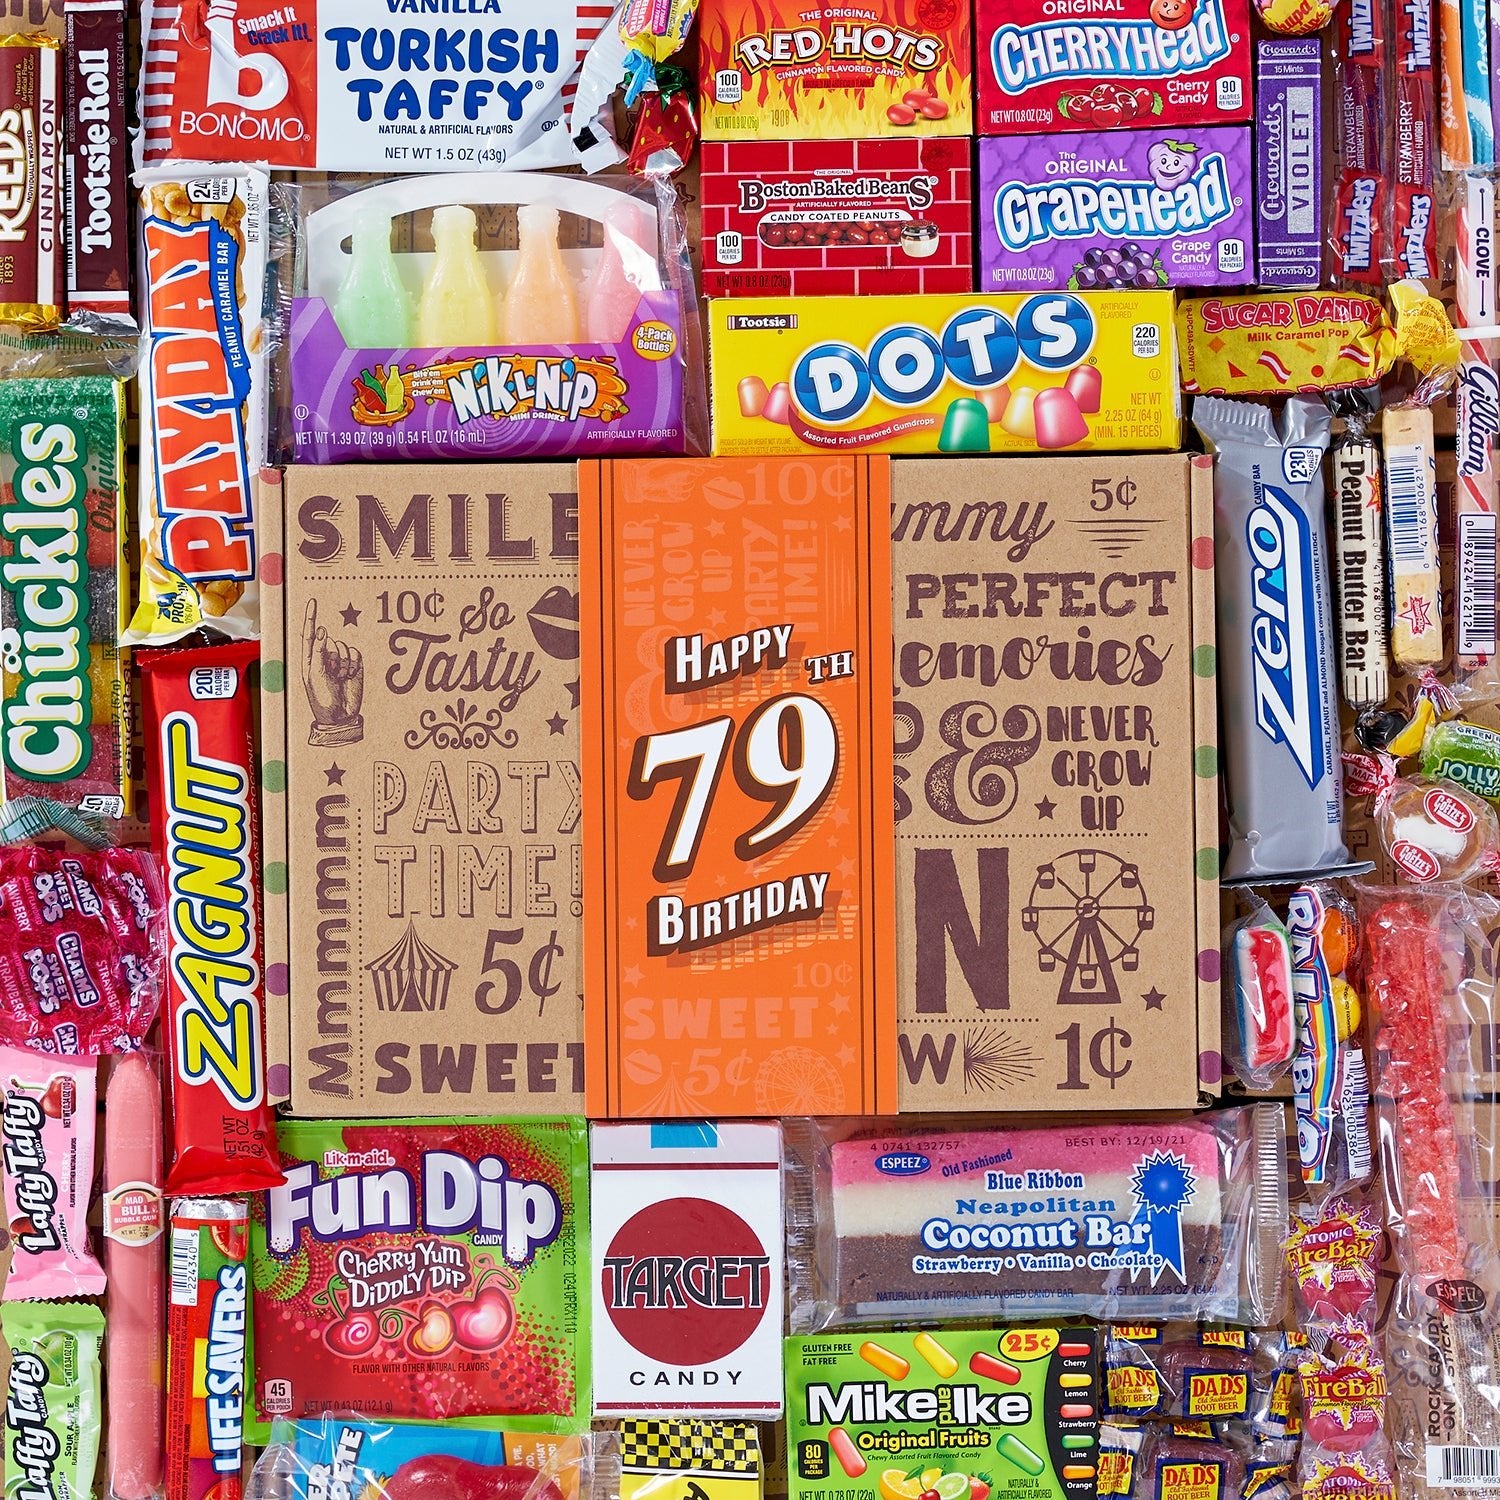 79th Birthday Retro Candy Gift - Vintage Candy Co.